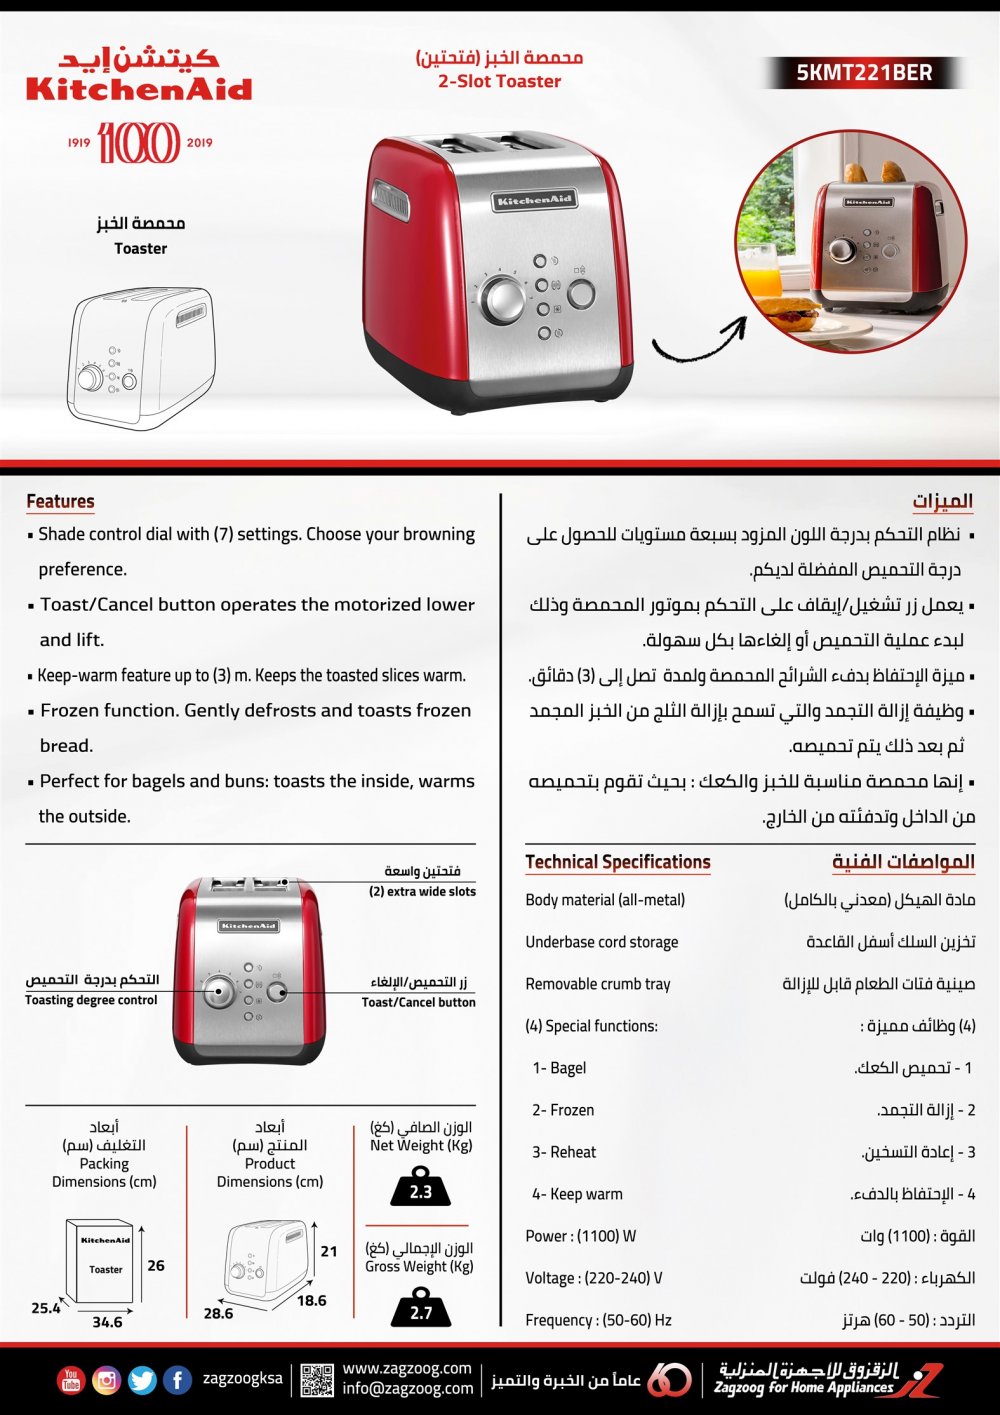 2-Slot Toaster - Red